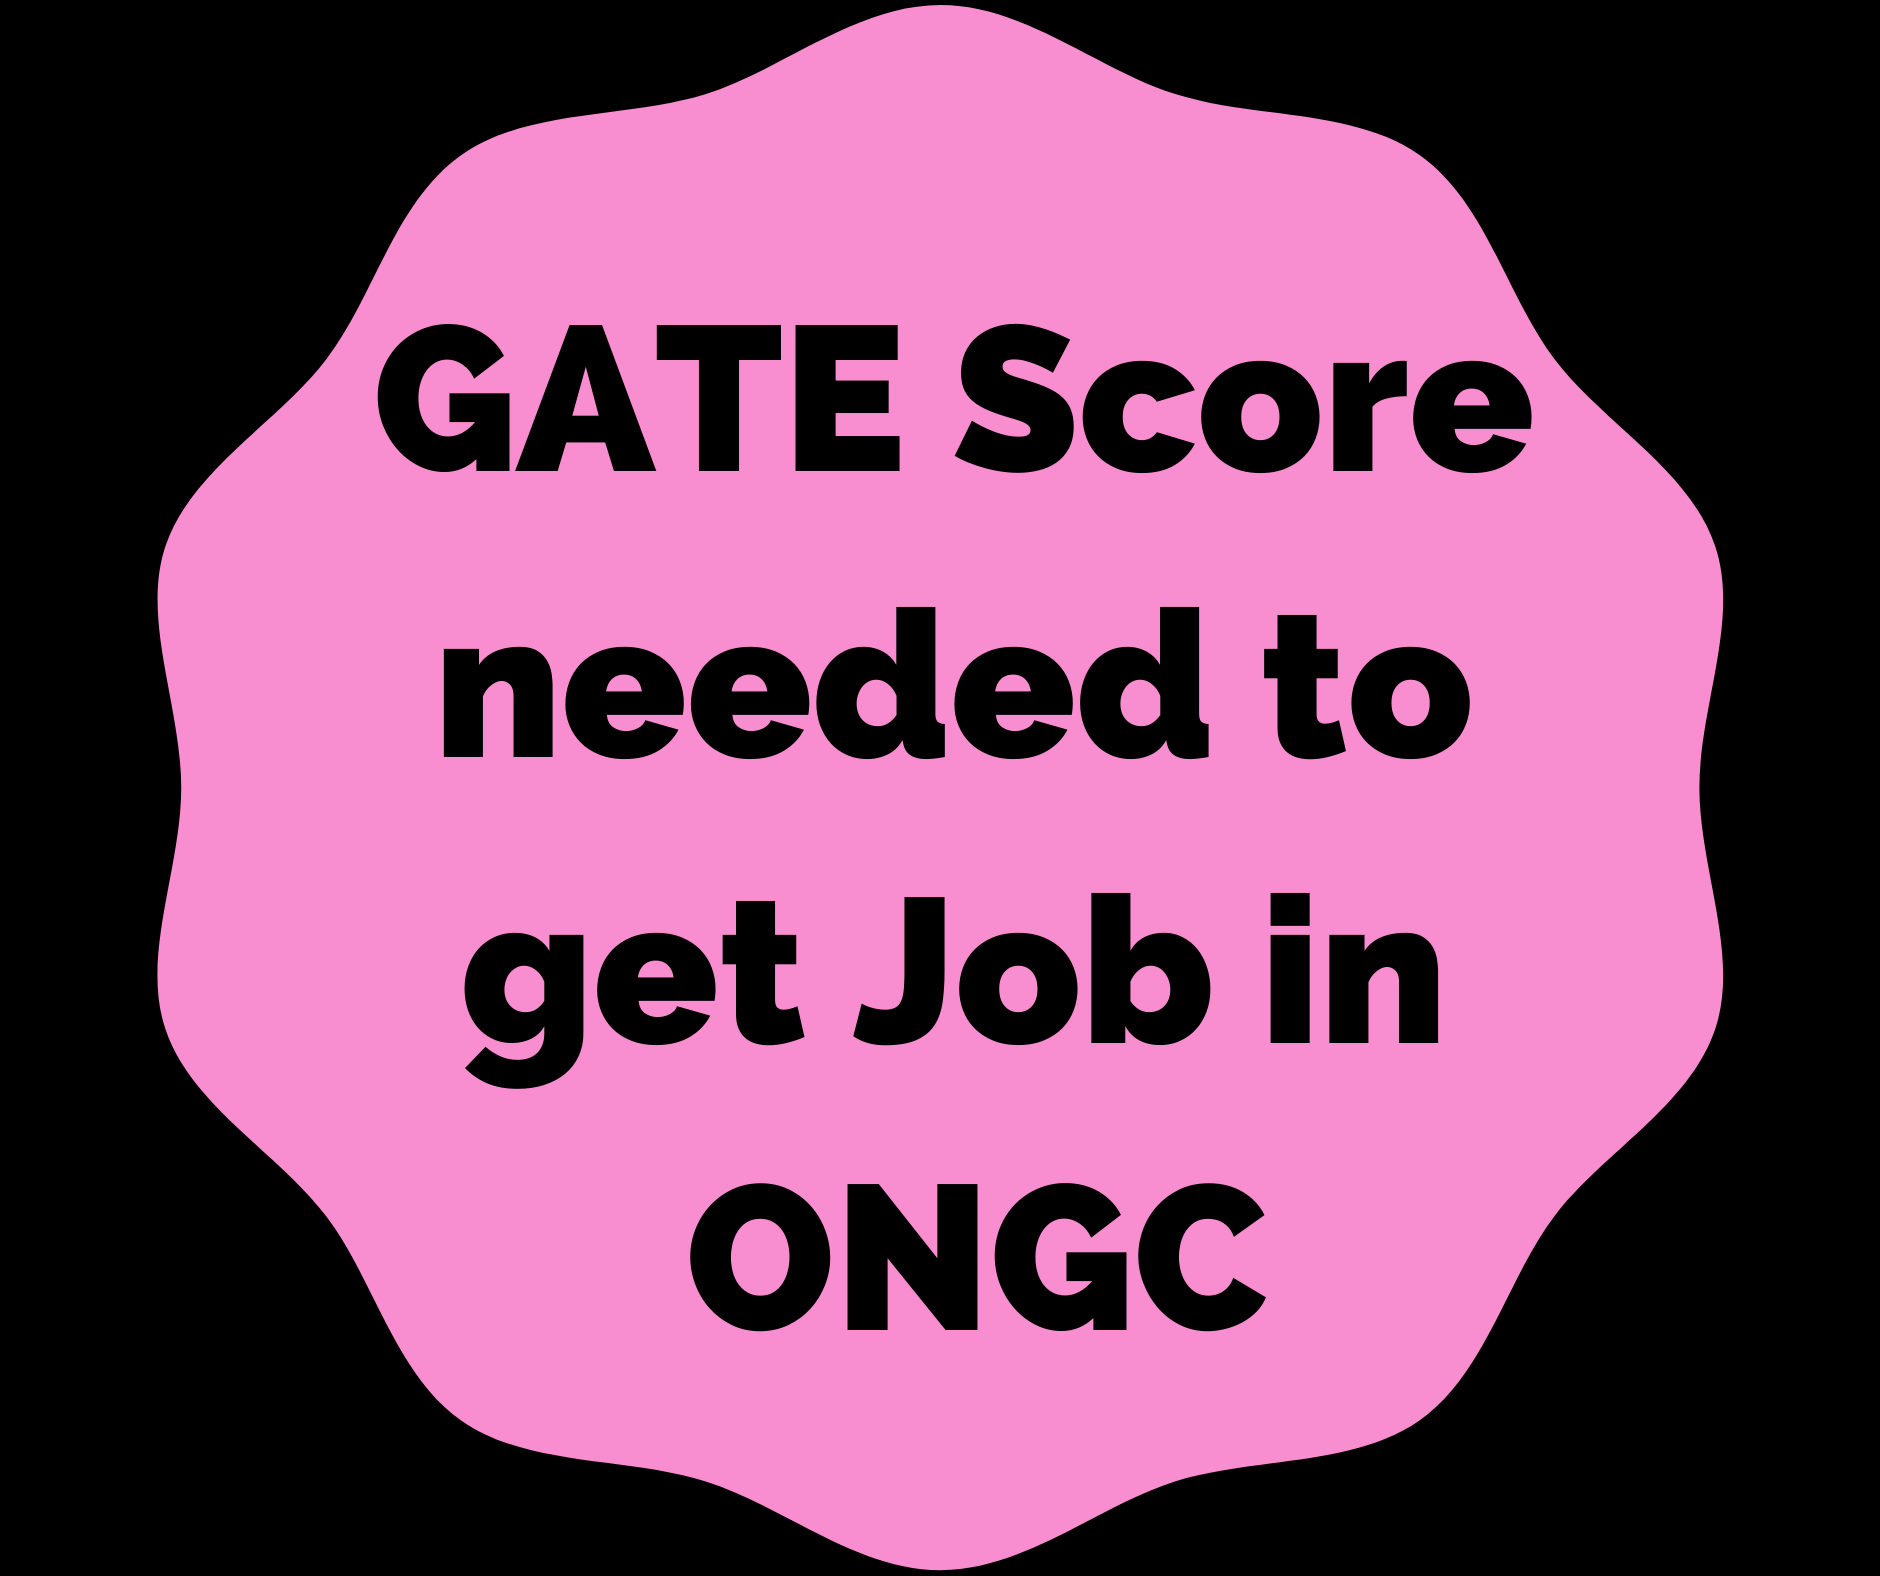 GATE score needed to get job in ONGC